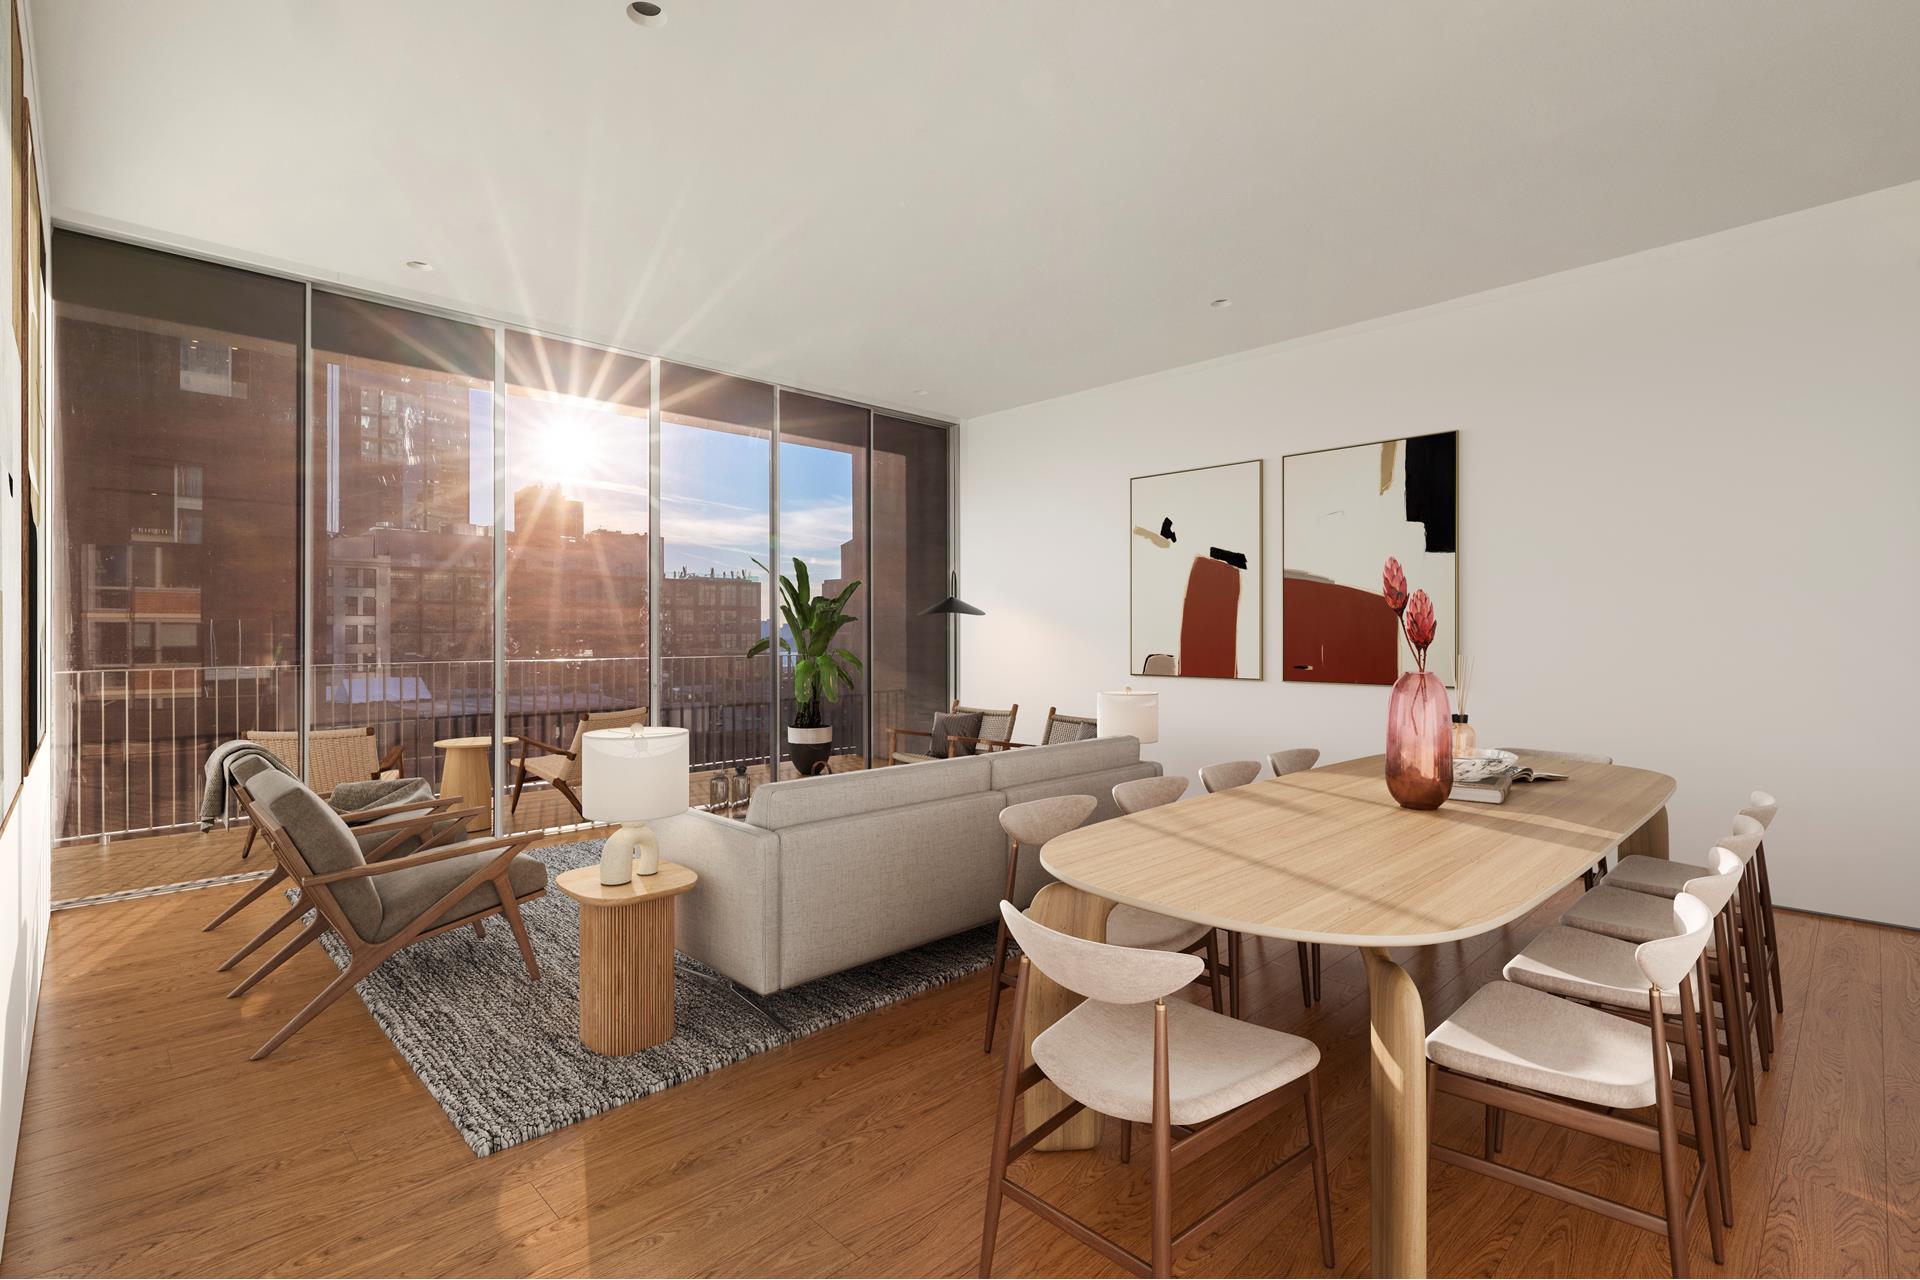 527 West 27th Street 9B, Chelsea, Downtown, NYC - 3 Bedrooms  
3.5 Bathrooms  
6 Rooms - 